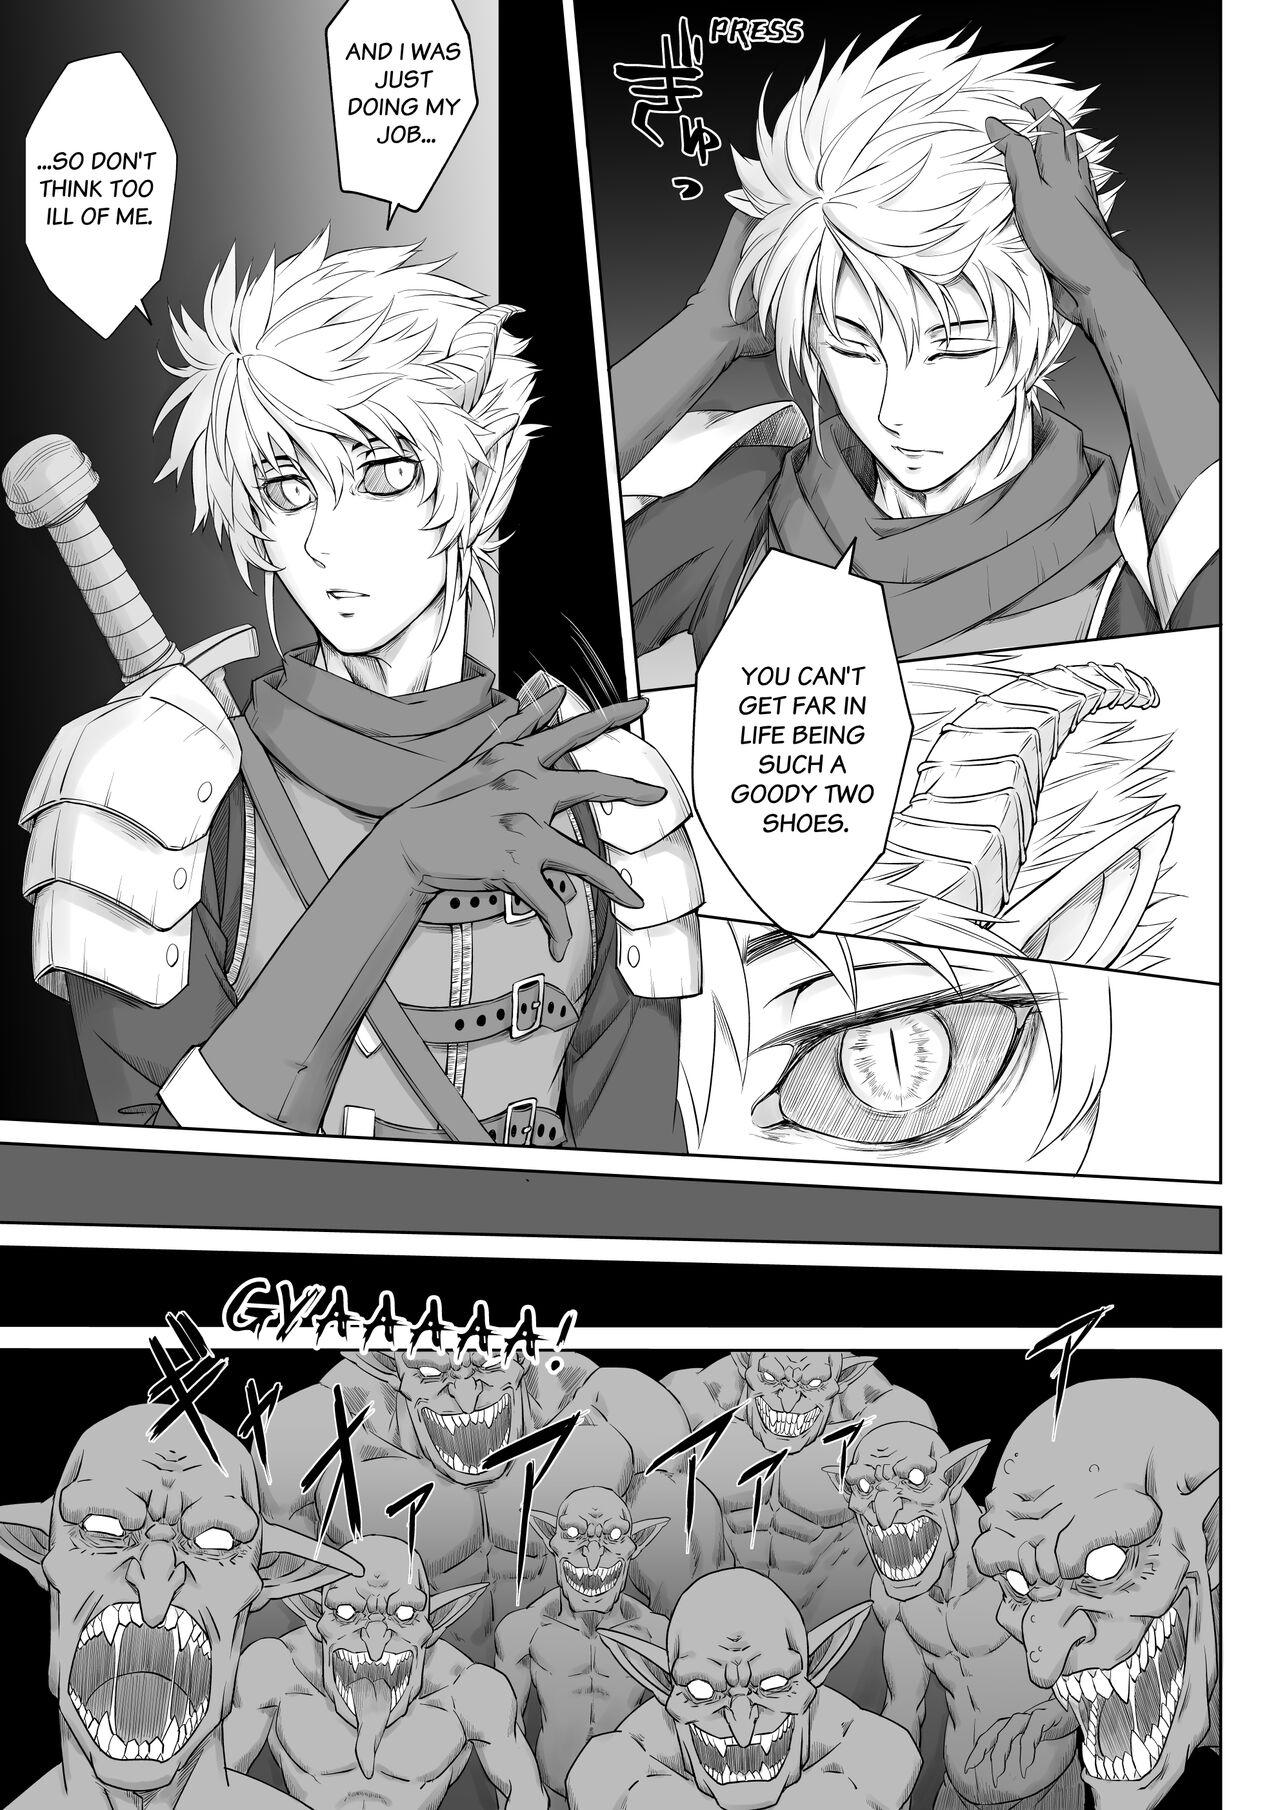 Assfingering Knight of the Labyrinth - Original Hiddencam - Page 11